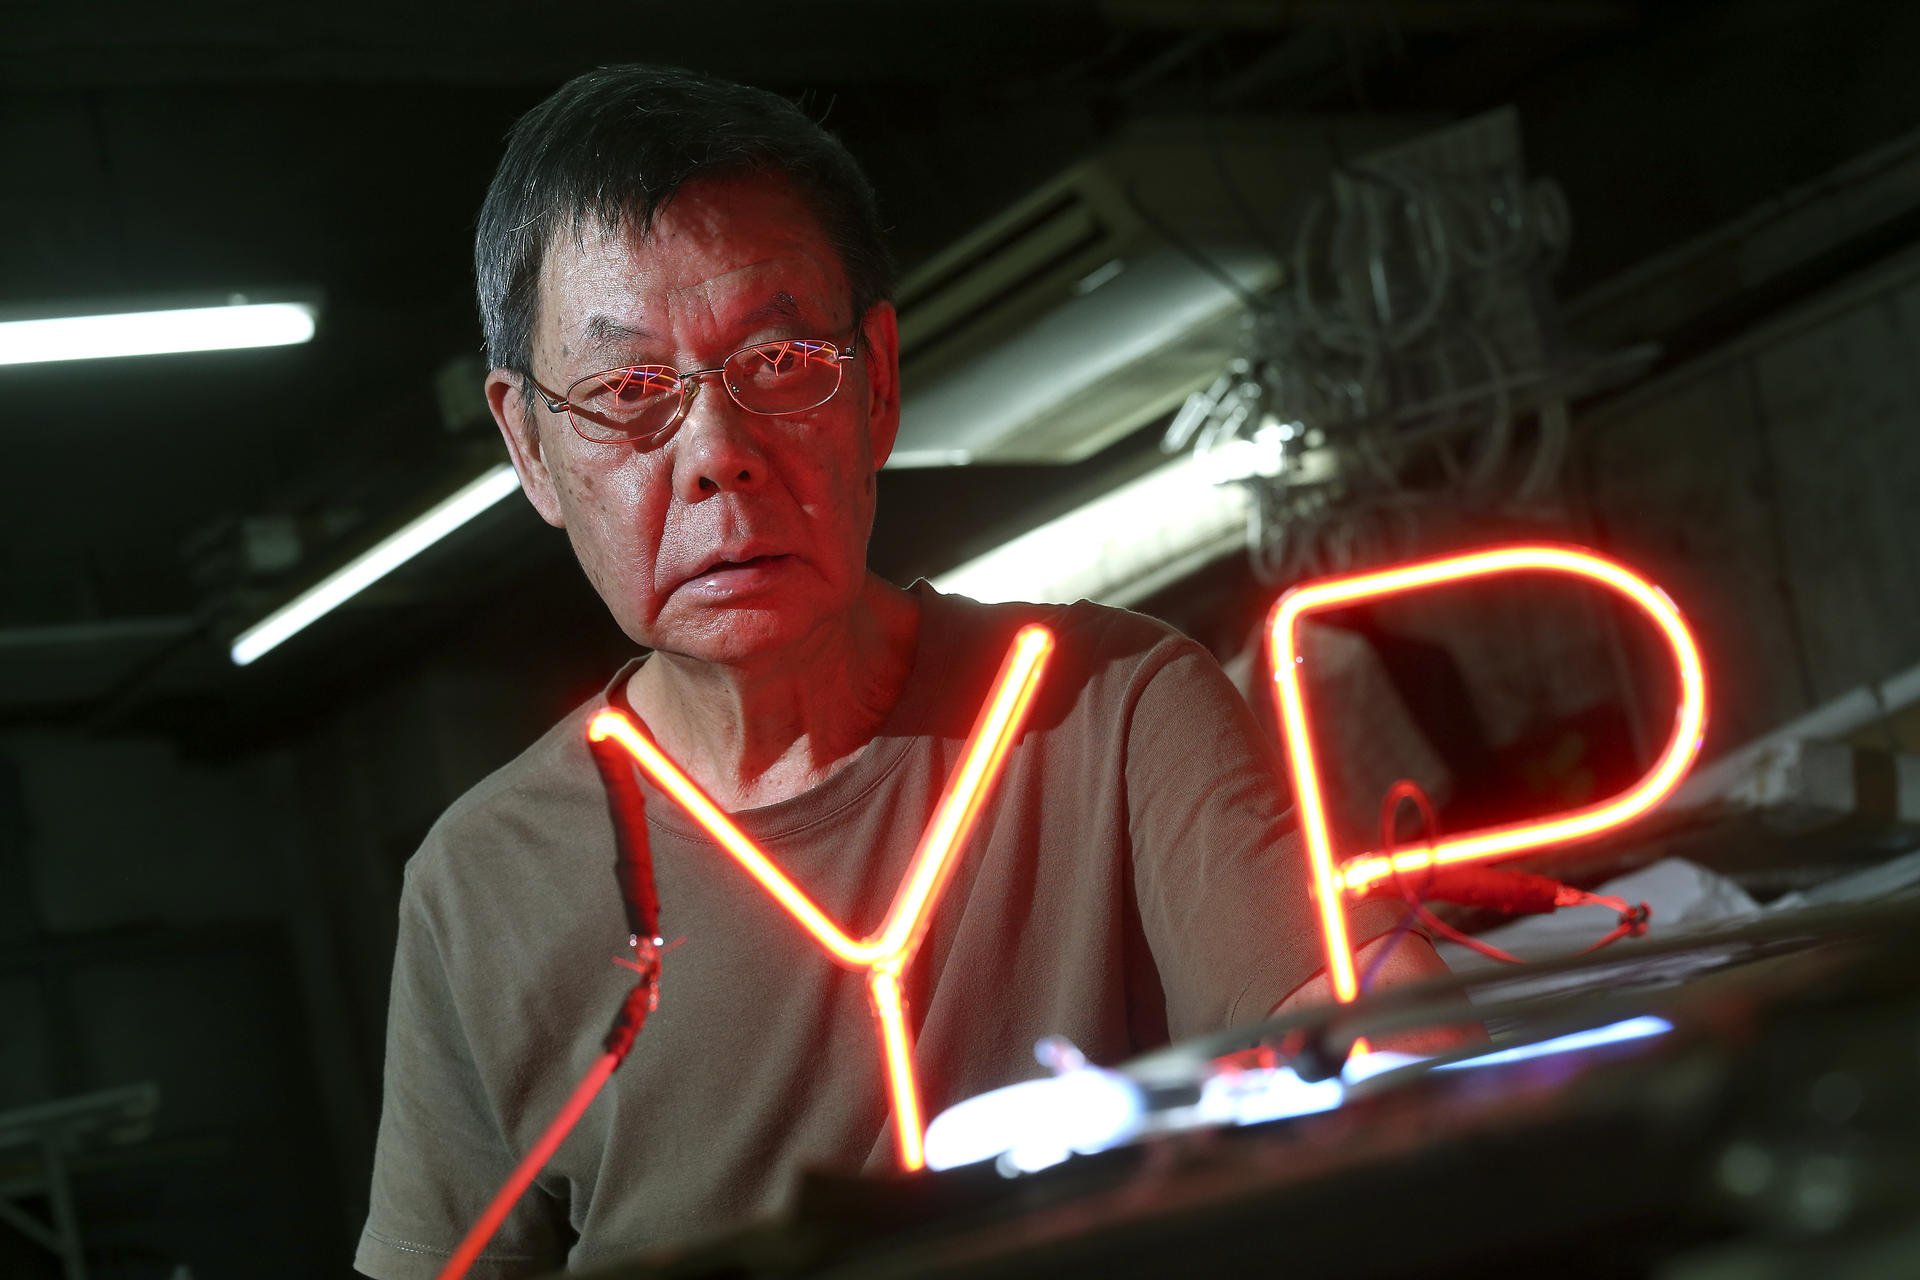 Lau Wan, one of the city's oldest neon craftsmen, fears the decline of neon reflects the decline of Hong Kong. Photo: K. Y. Cheng